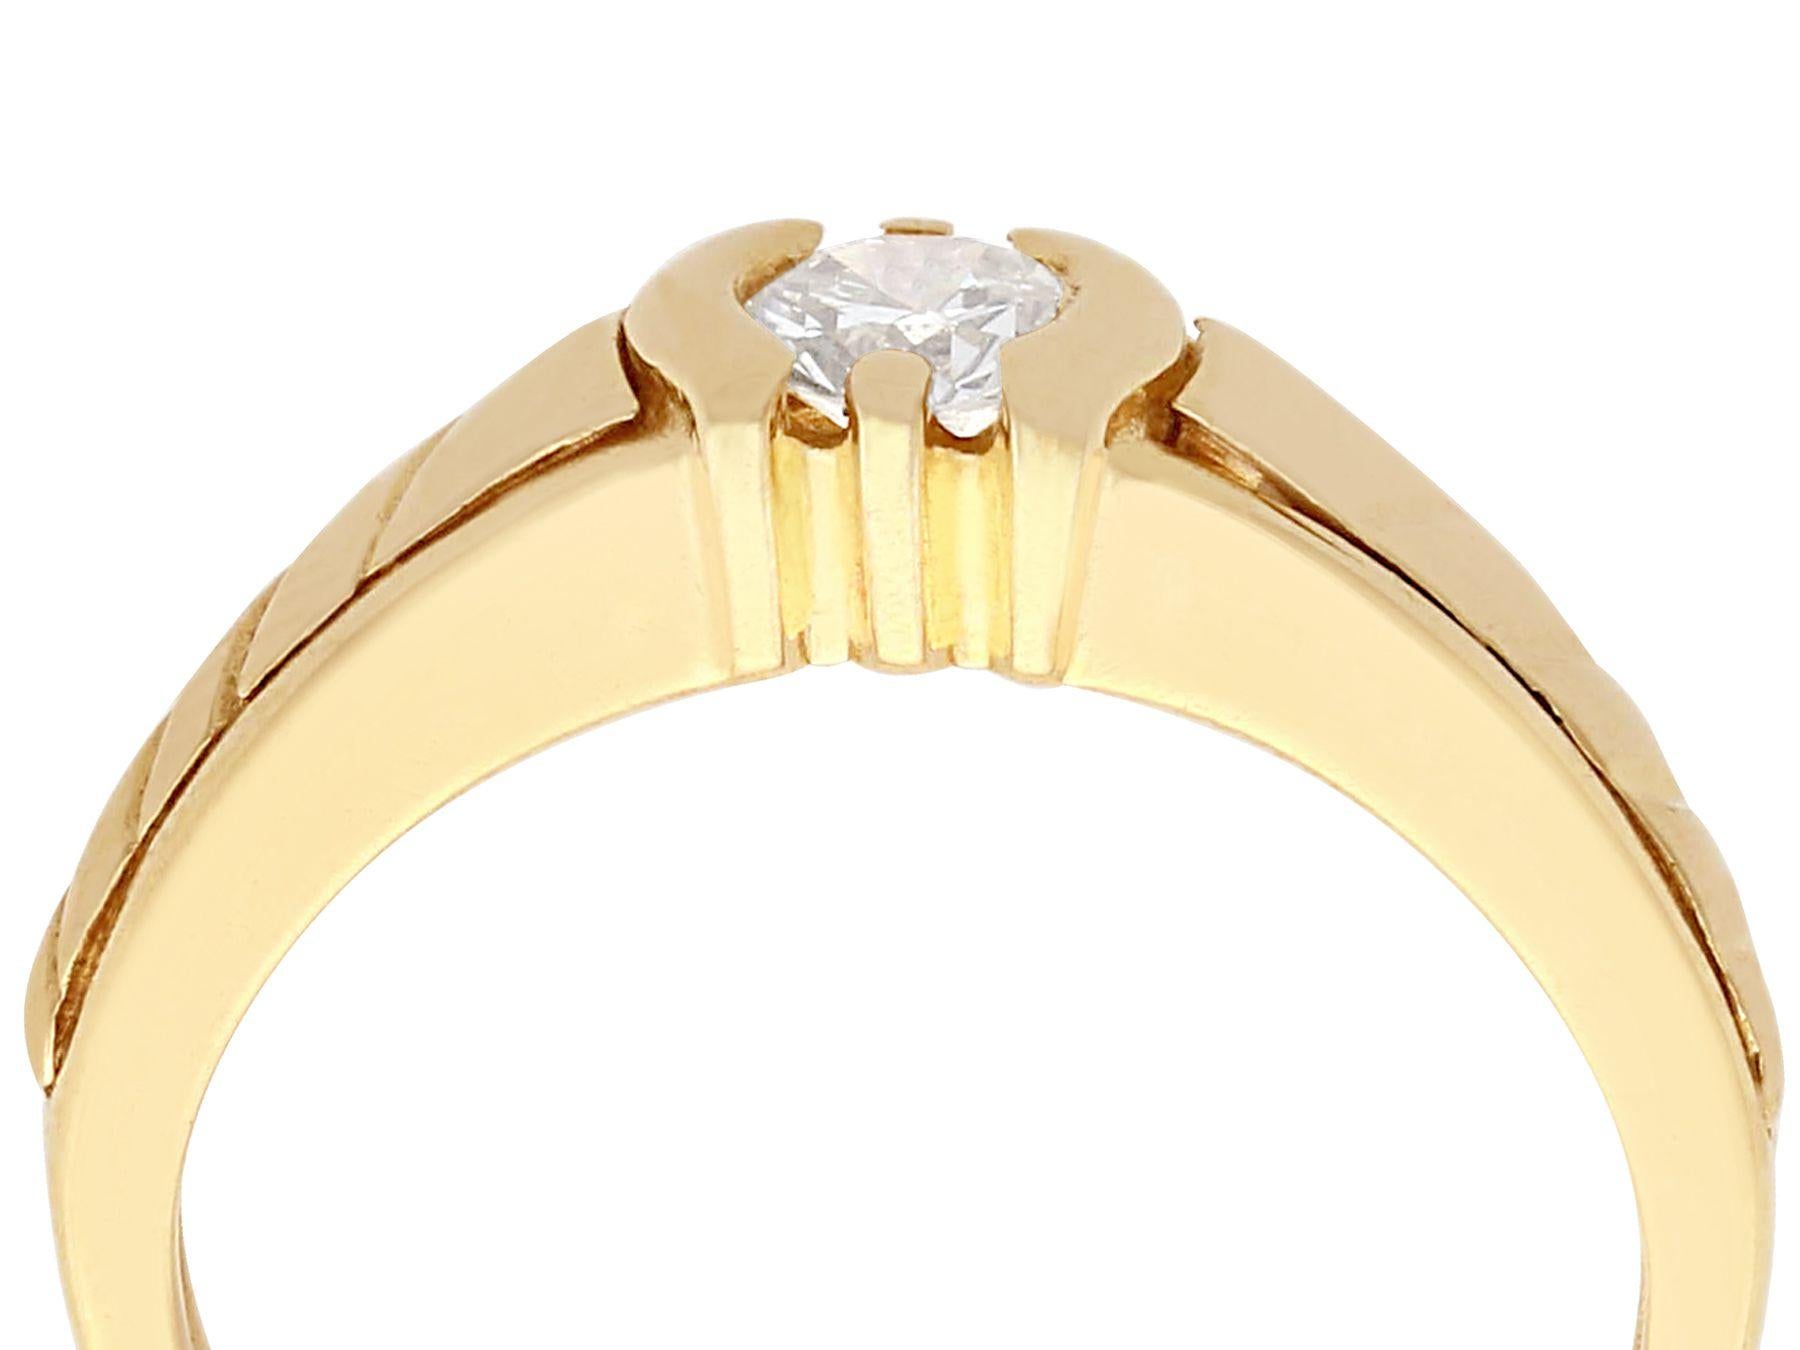  A fine and impressive 0.28 carat diamond and 18 karat yellow gold solitaire ring; part of our diverse vintage jewelry and estate jewelry collections.

This fine and impressive solitaire ring has been crafted in 18k yellow gold.

The substantial